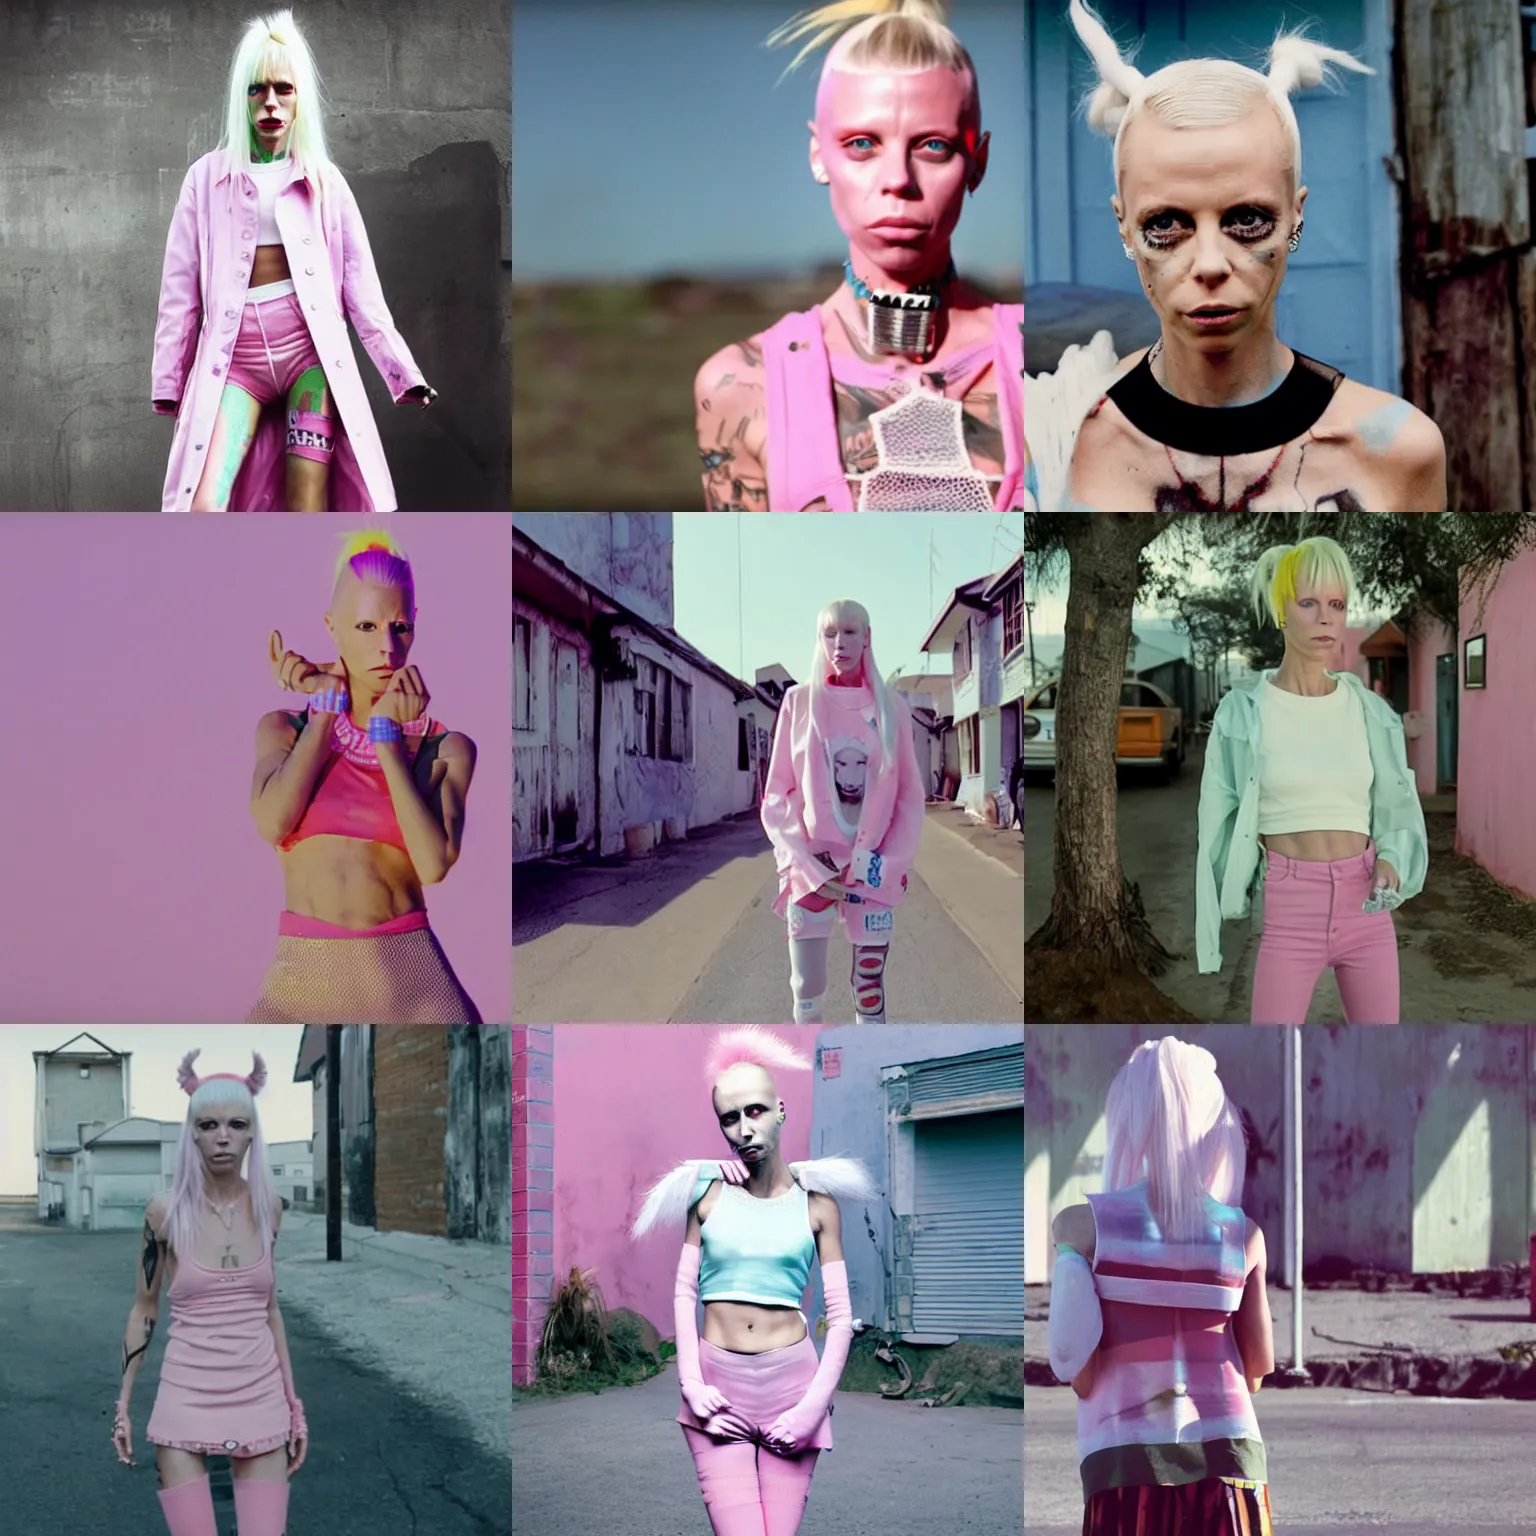 Prompt: yolandi visser from die antwoord standing in a township street, pastel color palette, still from a music video